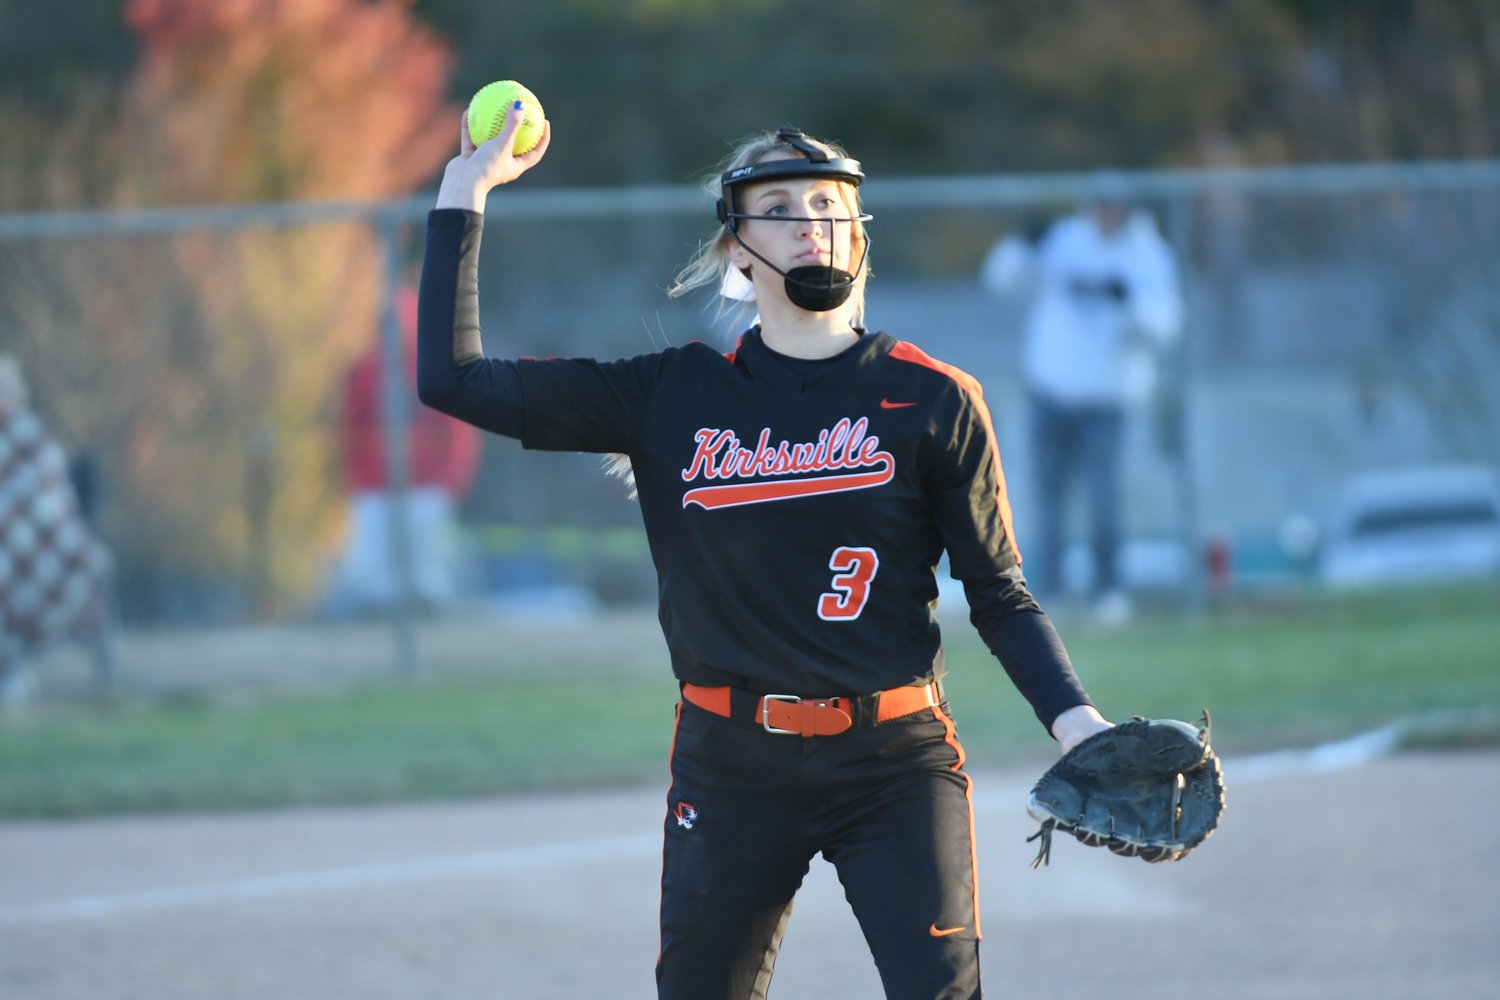 Action from Thursday's district semifinal game between Kirksville and Savannah in Chillicothe.